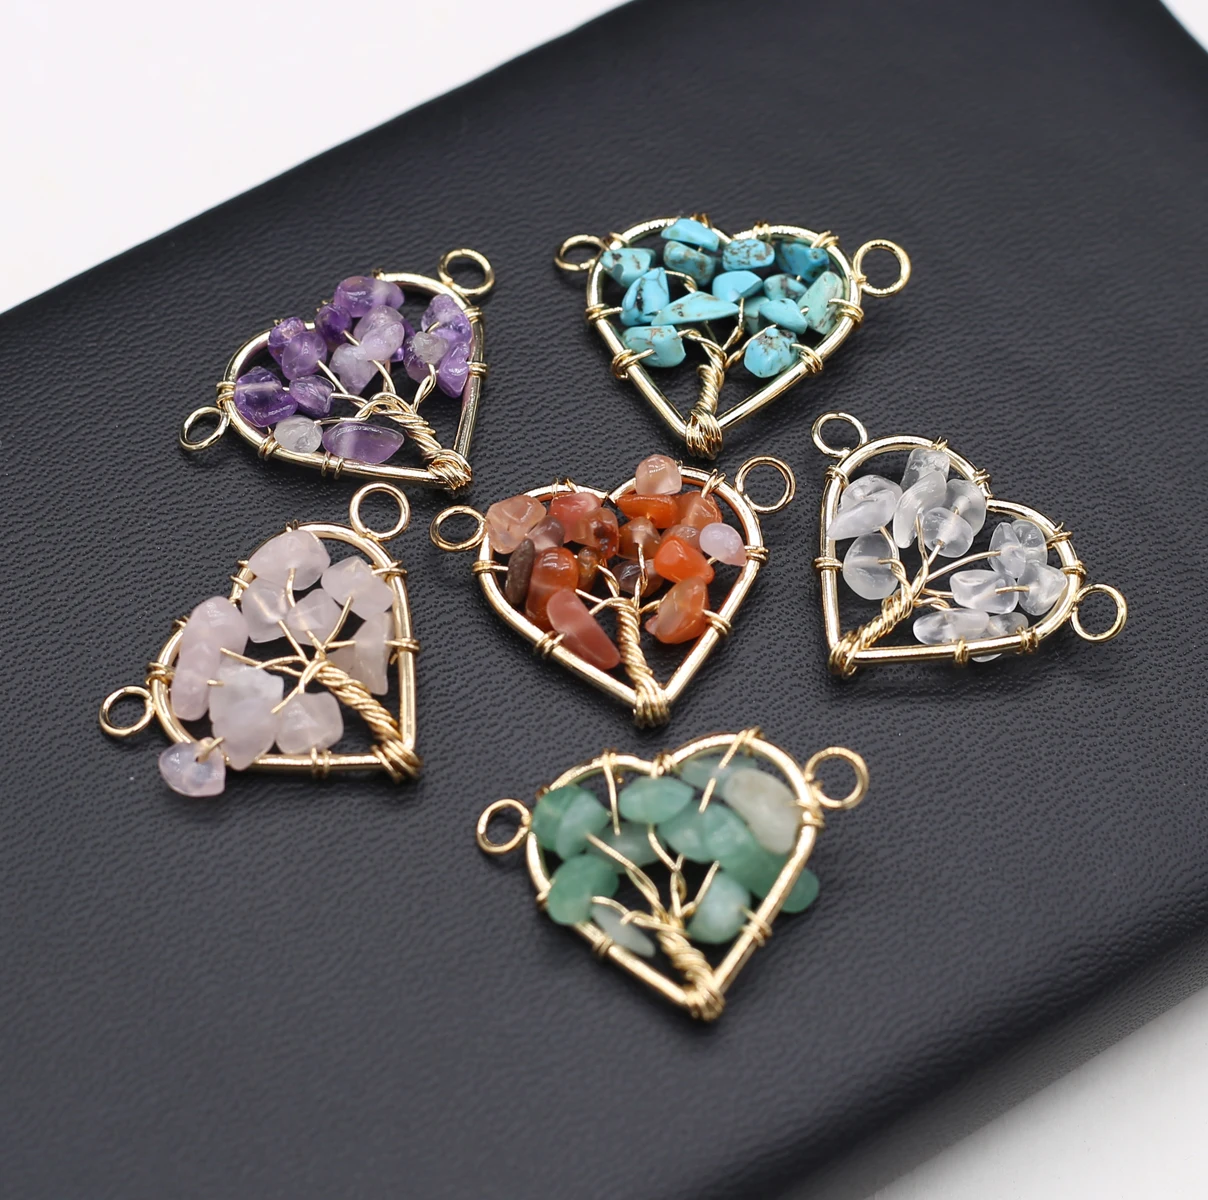 

Natural Crystal Gravel Handmade Twining Tree of Life Double Hanging Heart Shape Pendant Connector for Making DIY Bracelet Access